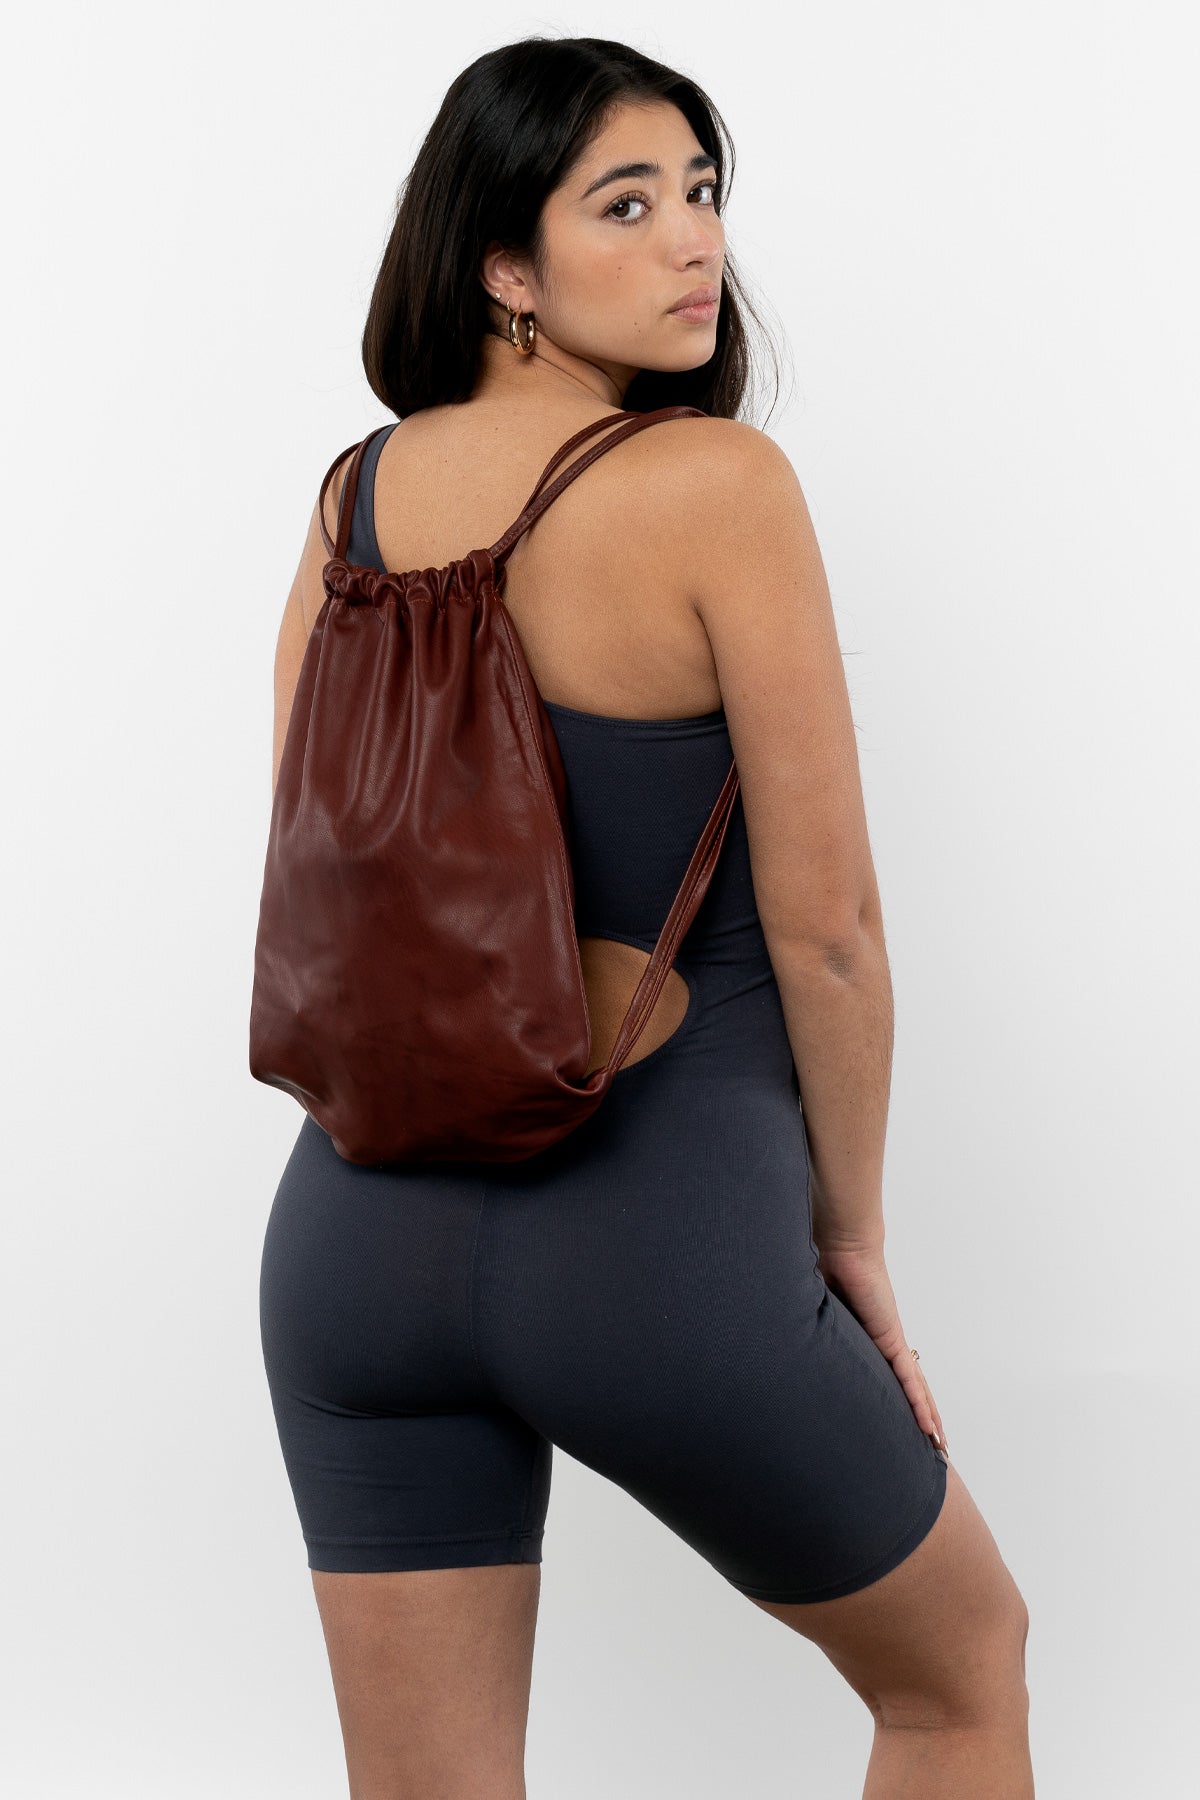 Los Angeles Apparel | Leather Drawstring Backpack in Mustang